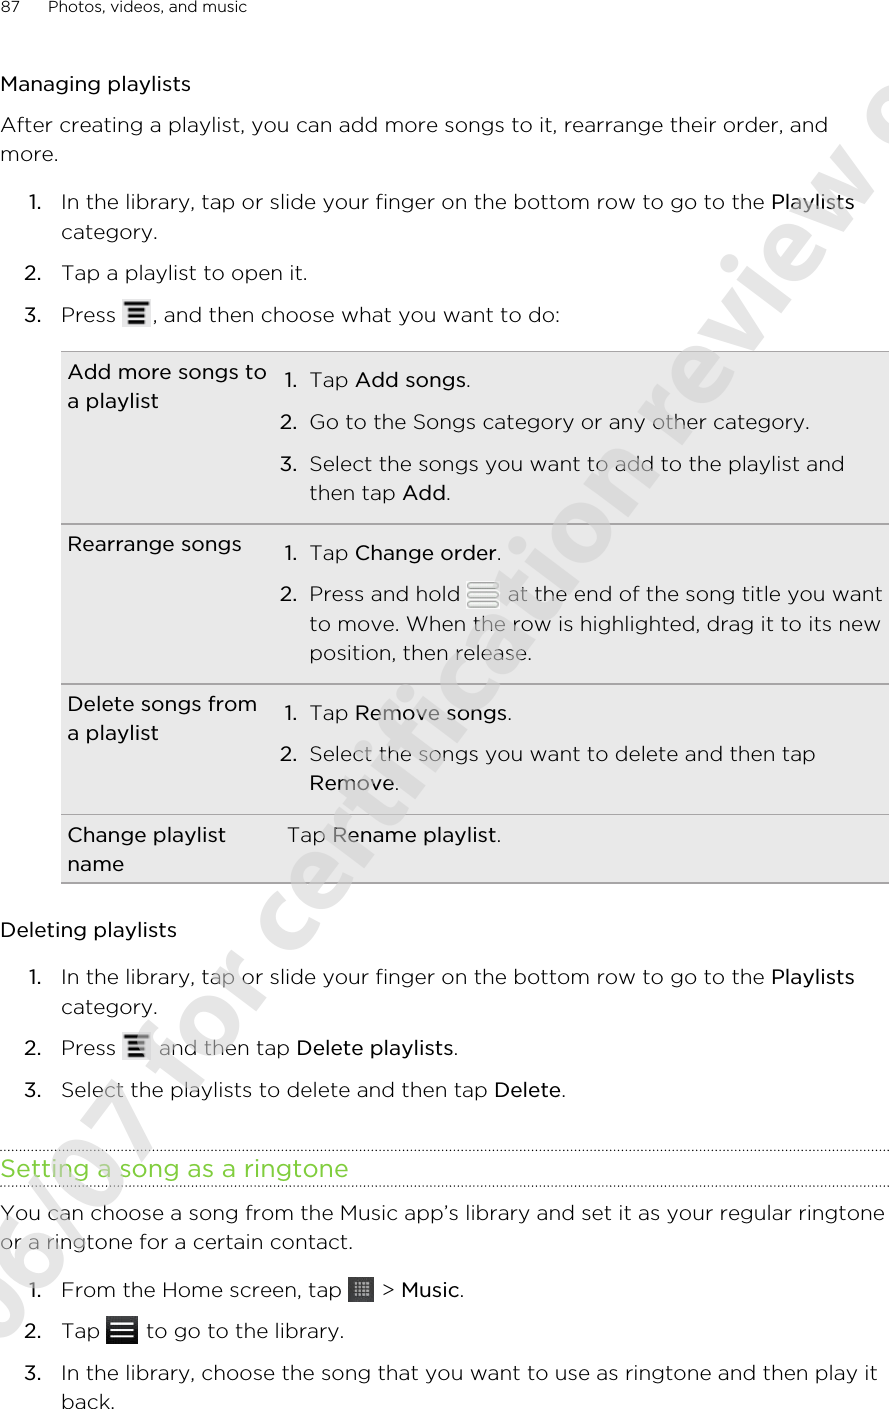 Managing playlistsAfter creating a playlist, you can add more songs to it, rearrange their order, andmore.1. In the library, tap or slide your finger on the bottom row to go to the Playlistscategory.2. Tap a playlist to open it.3. Press  , and then choose what you want to do:Add more songs toa playlist 1. Tap Add songs.2. Go to the Songs category or any other category.3. Select the songs you want to add to the playlist andthen tap Add.Rearrange songs 1. Tap Change order.2. Press and hold   at the end of the song title you wantto move. When the row is highlighted, drag it to its newposition, then release.Delete songs froma playlist 1. Tap Remove songs.2. Select the songs you want to delete and then tapRemove.Change playlistnameTap Rename playlist.Deleting playlists1. In the library, tap or slide your finger on the bottom row to go to the Playlistscategory.2. Press   and then tap Delete playlists.3. Select the playlists to delete and then tap Delete.Setting a song as a ringtoneYou can choose a song from the Music app’s library and set it as your regular ringtoneor a ringtone for a certain contact.1. From the Home screen, tap   &gt; Music.2. Tap   to go to the library.3. In the library, choose the song that you want to use as ringtone and then play itback.87 Photos, videos, and music2011/06/07 for certification review only